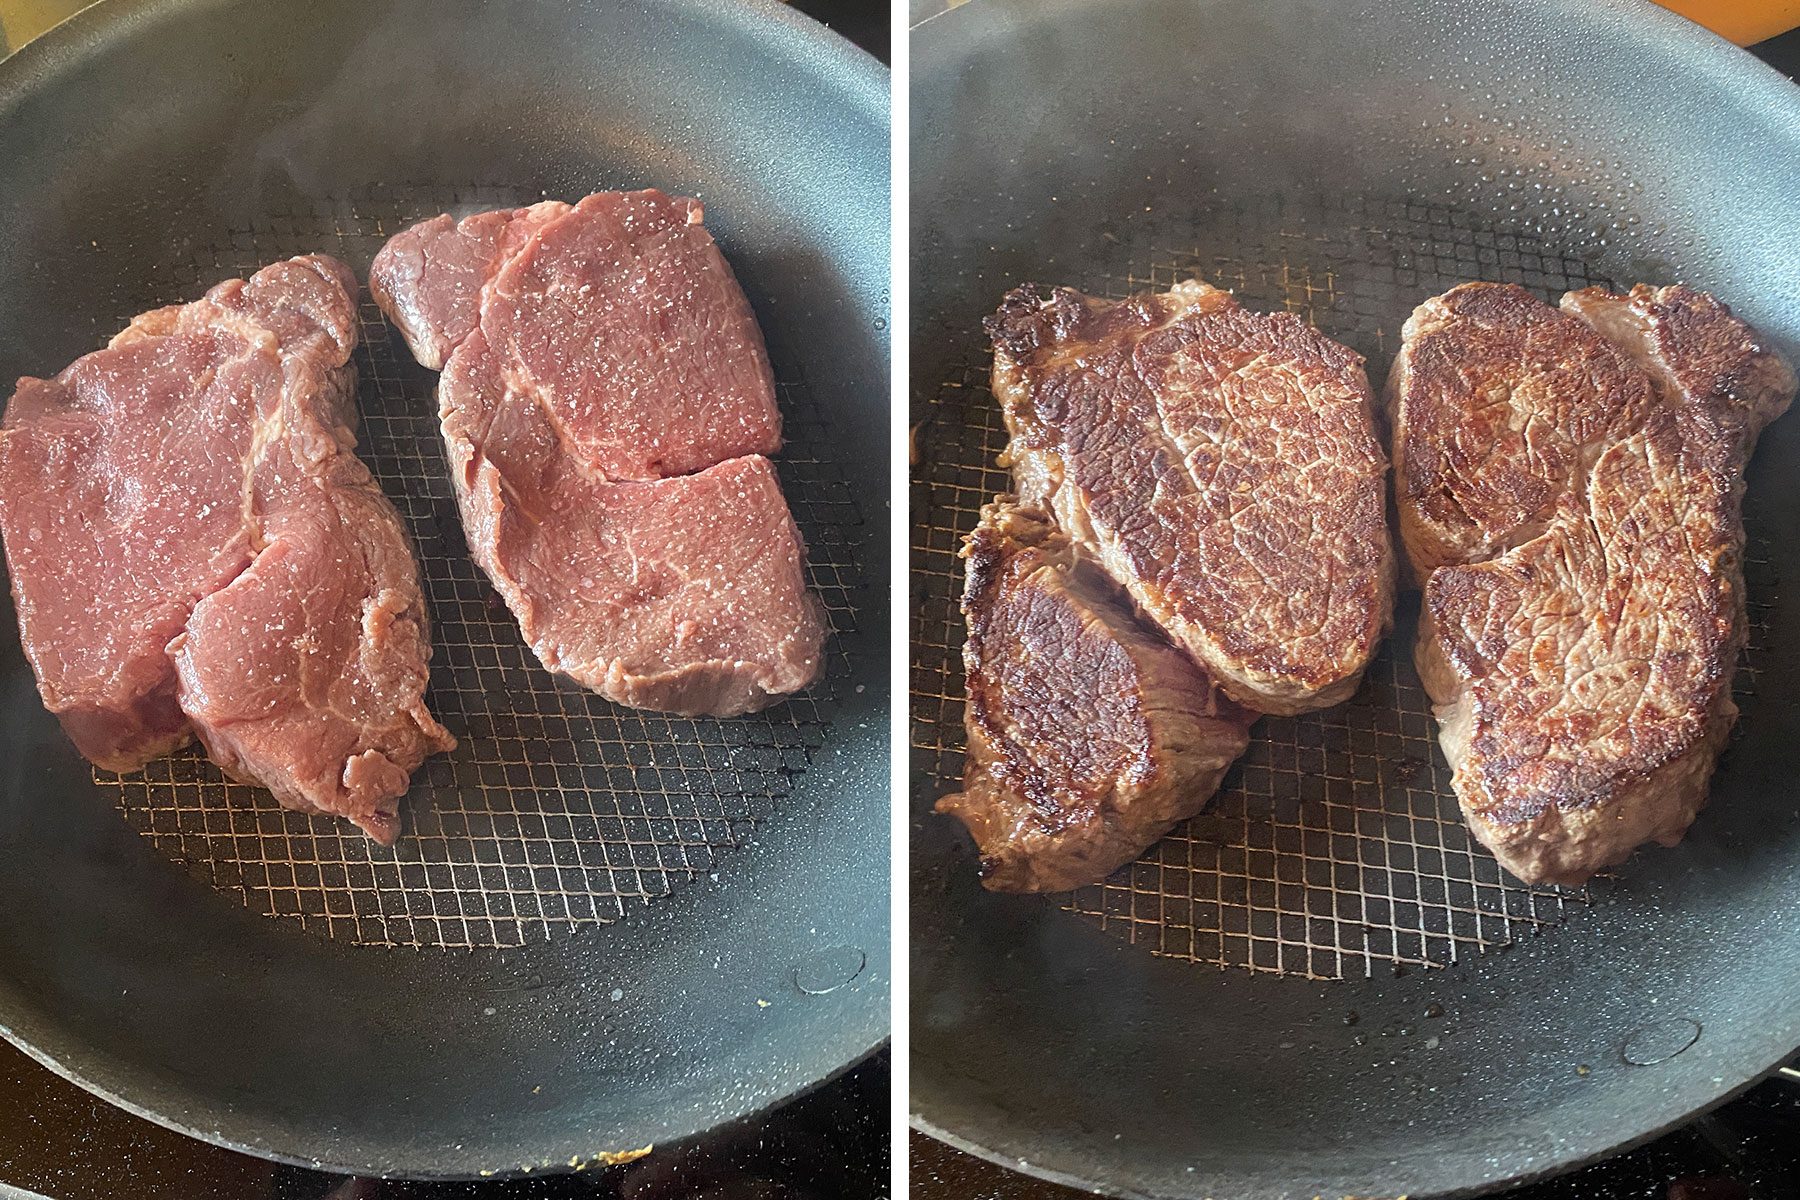 Steak before and after being prepared